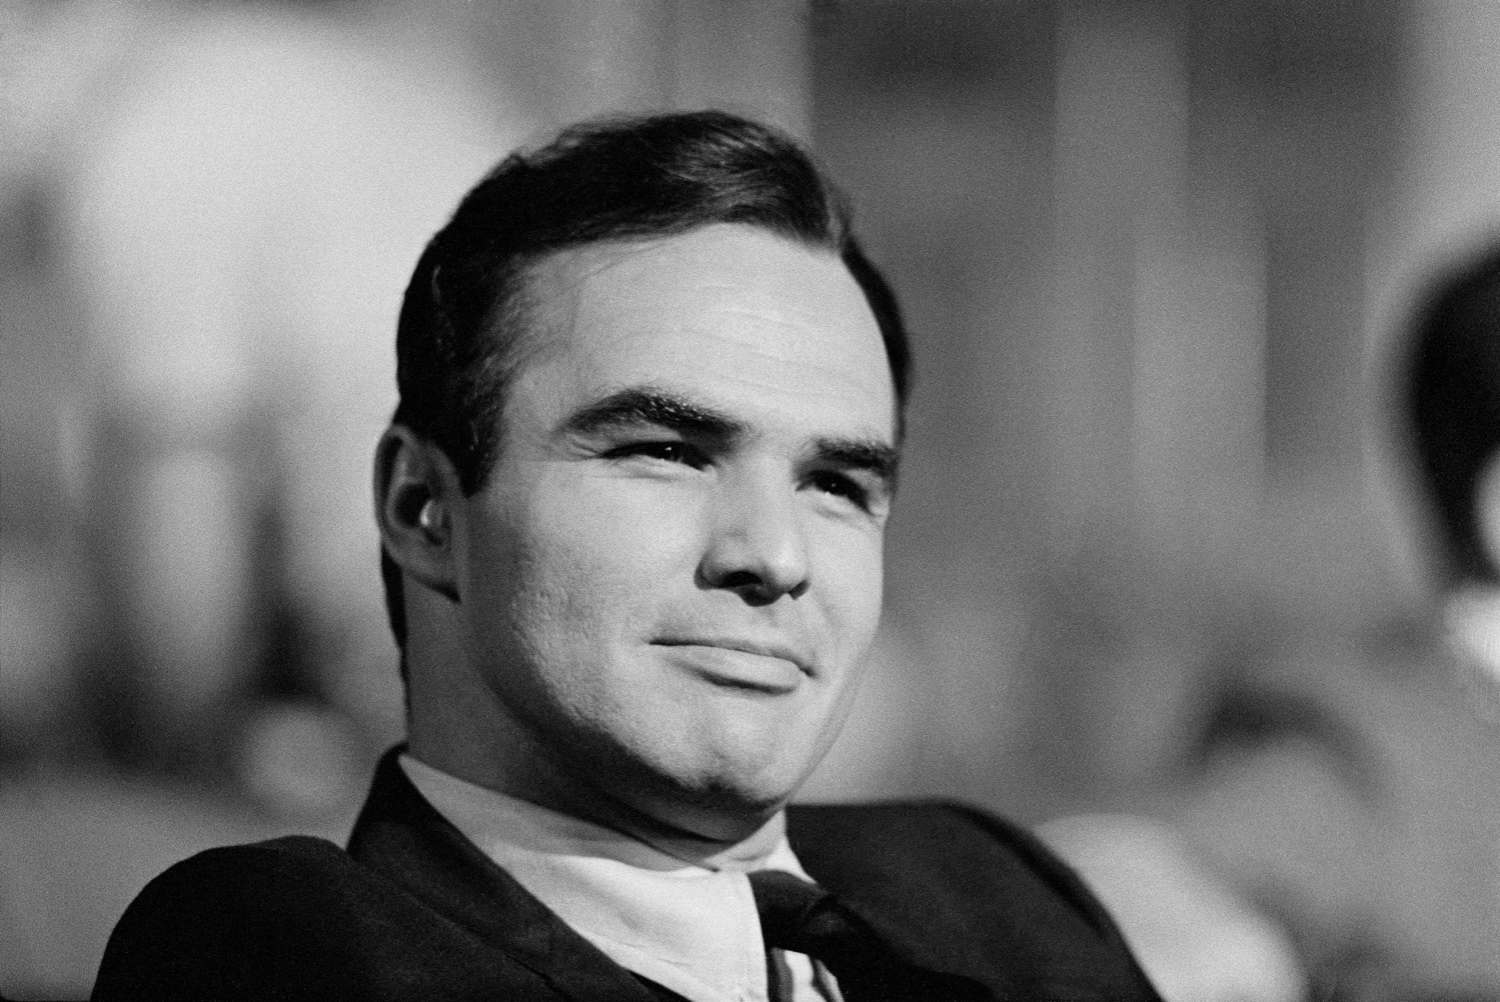 Burt Reynolds in 1966. A Hollywood charmer, he was a hit with audiences but not always with the critics.CreditCreditSam Falk/The New York Times